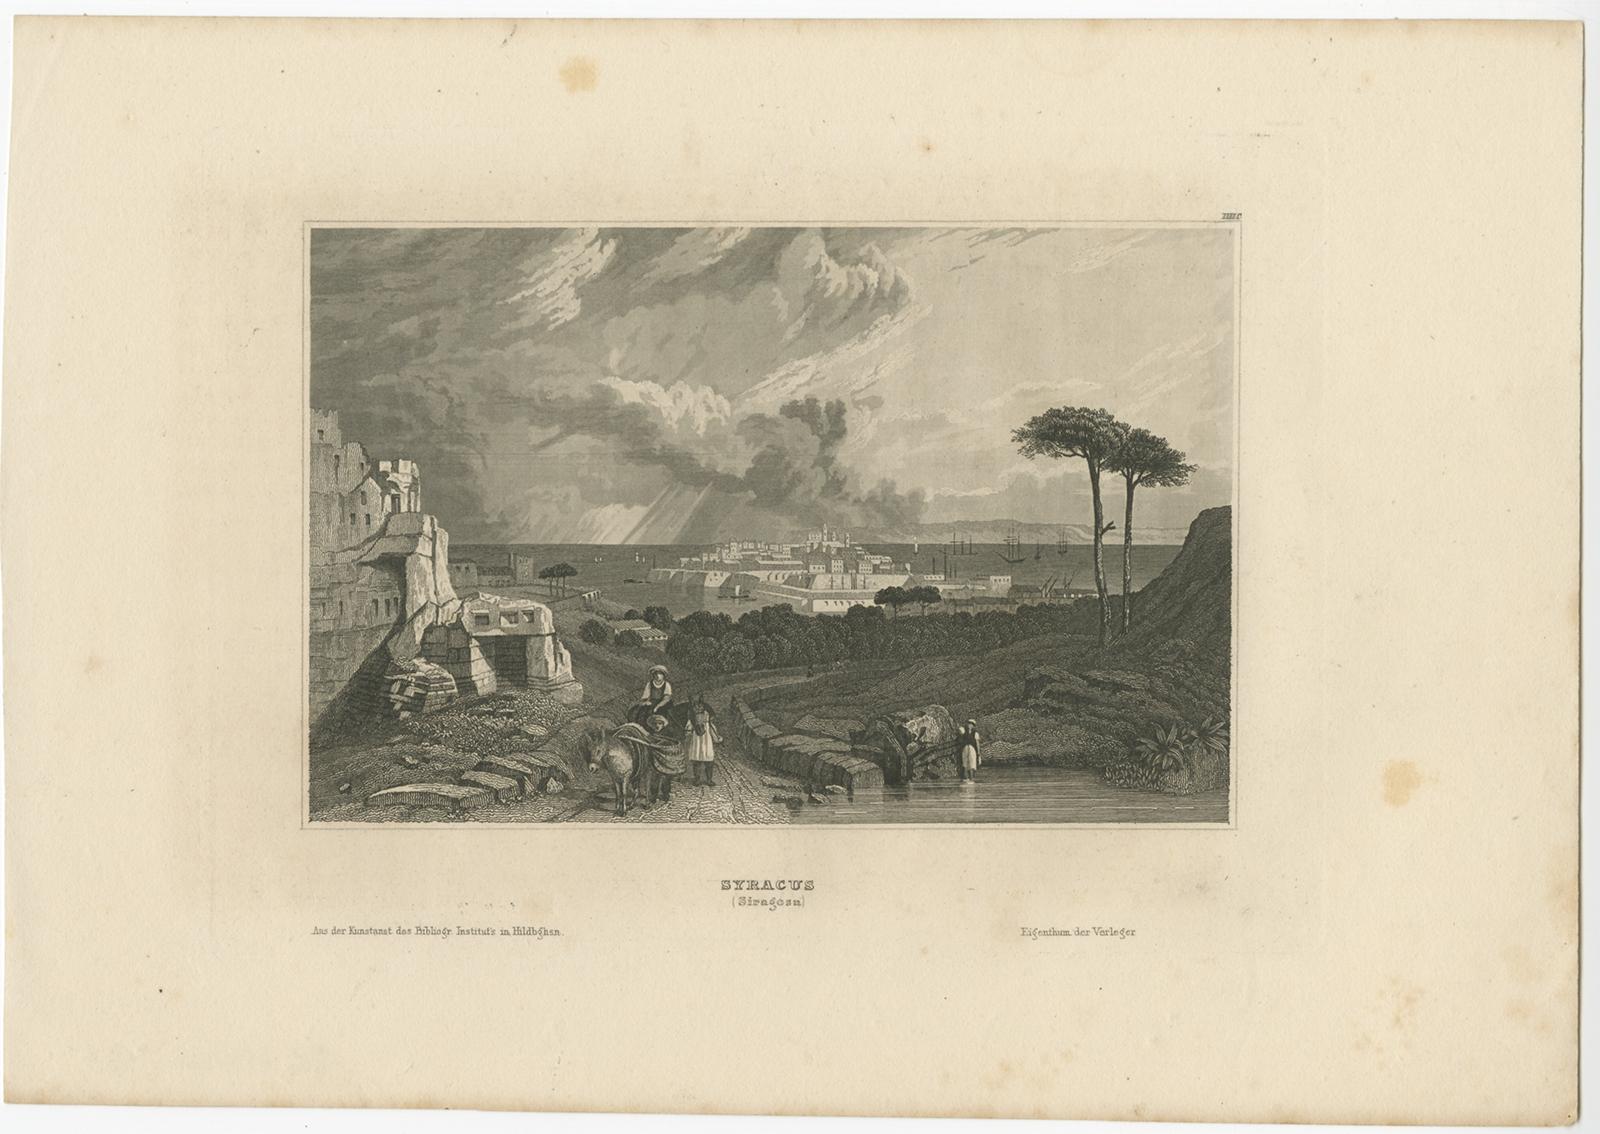 Antique print titled 'Syracus'. View of Syracuse, Sicily, Italy. Originates from 'Meyers Universum'. 

Artists and Engravers: Joseph Meyer (May 9, 1796 - June 27, 1856) was a German industrialist and publisher, most noted for his encyclopedia,